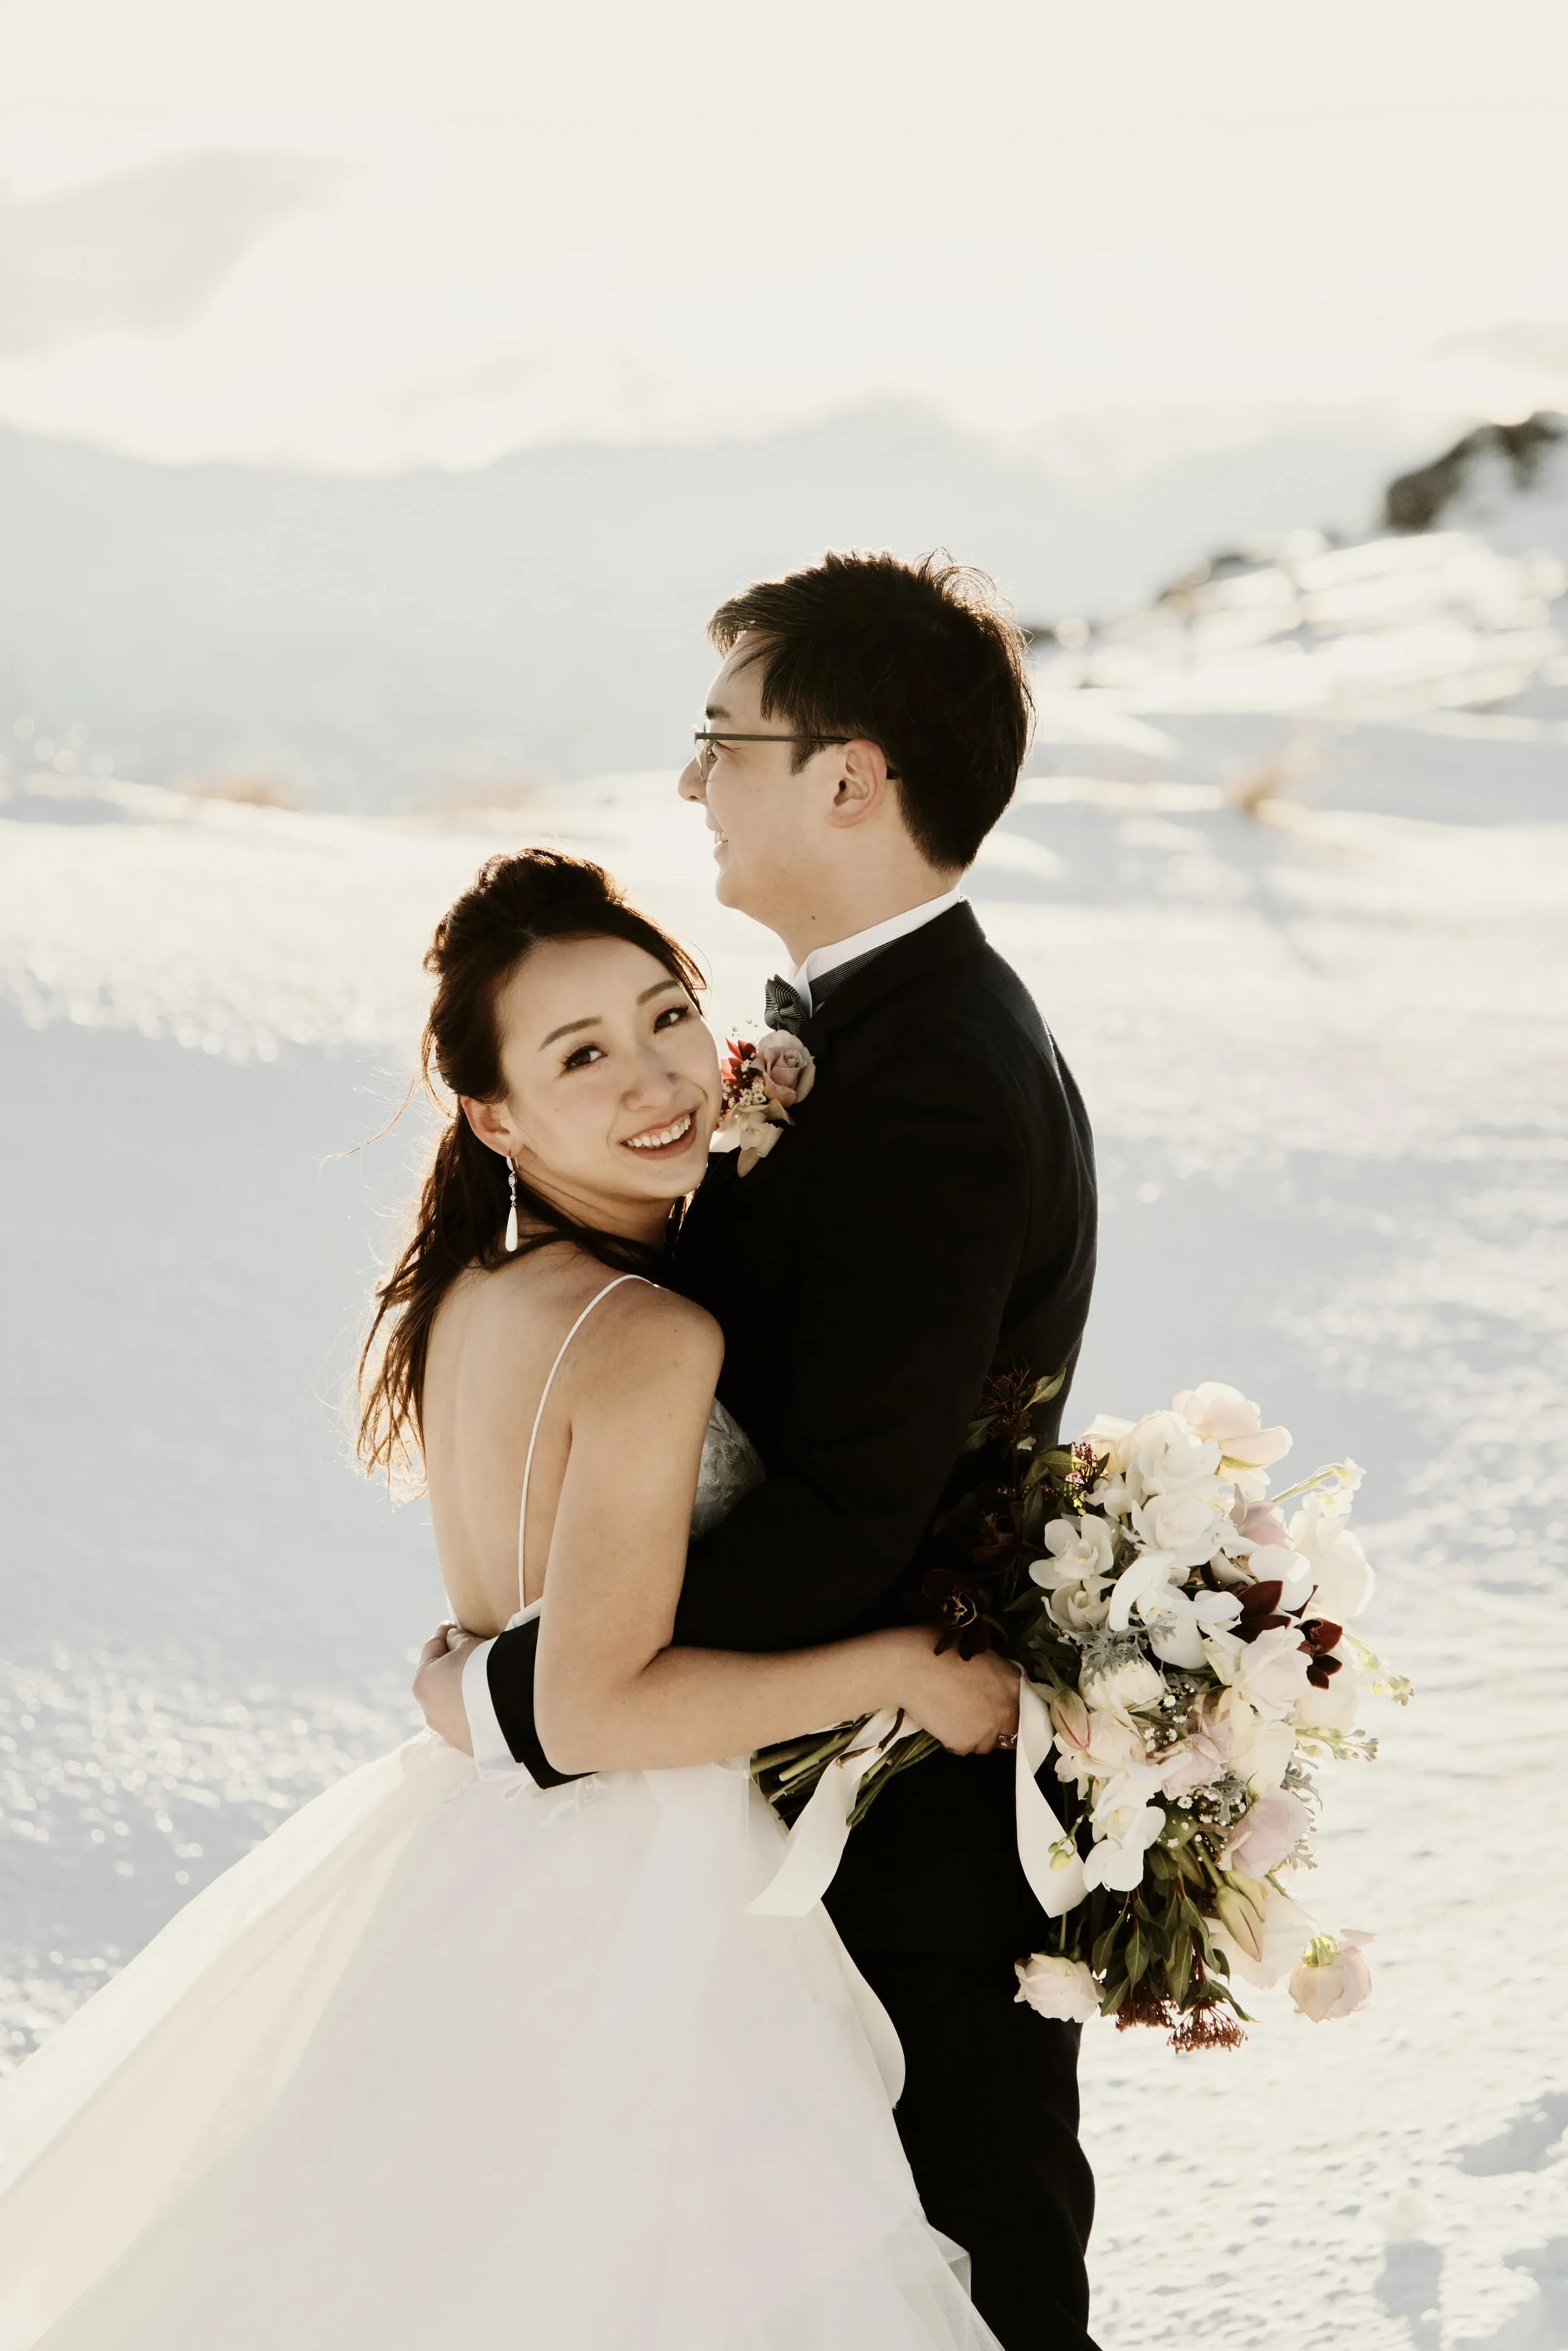 Stephanie and Carven's romantic elopement captured amidst the breathtaking scenery of the Remarkables